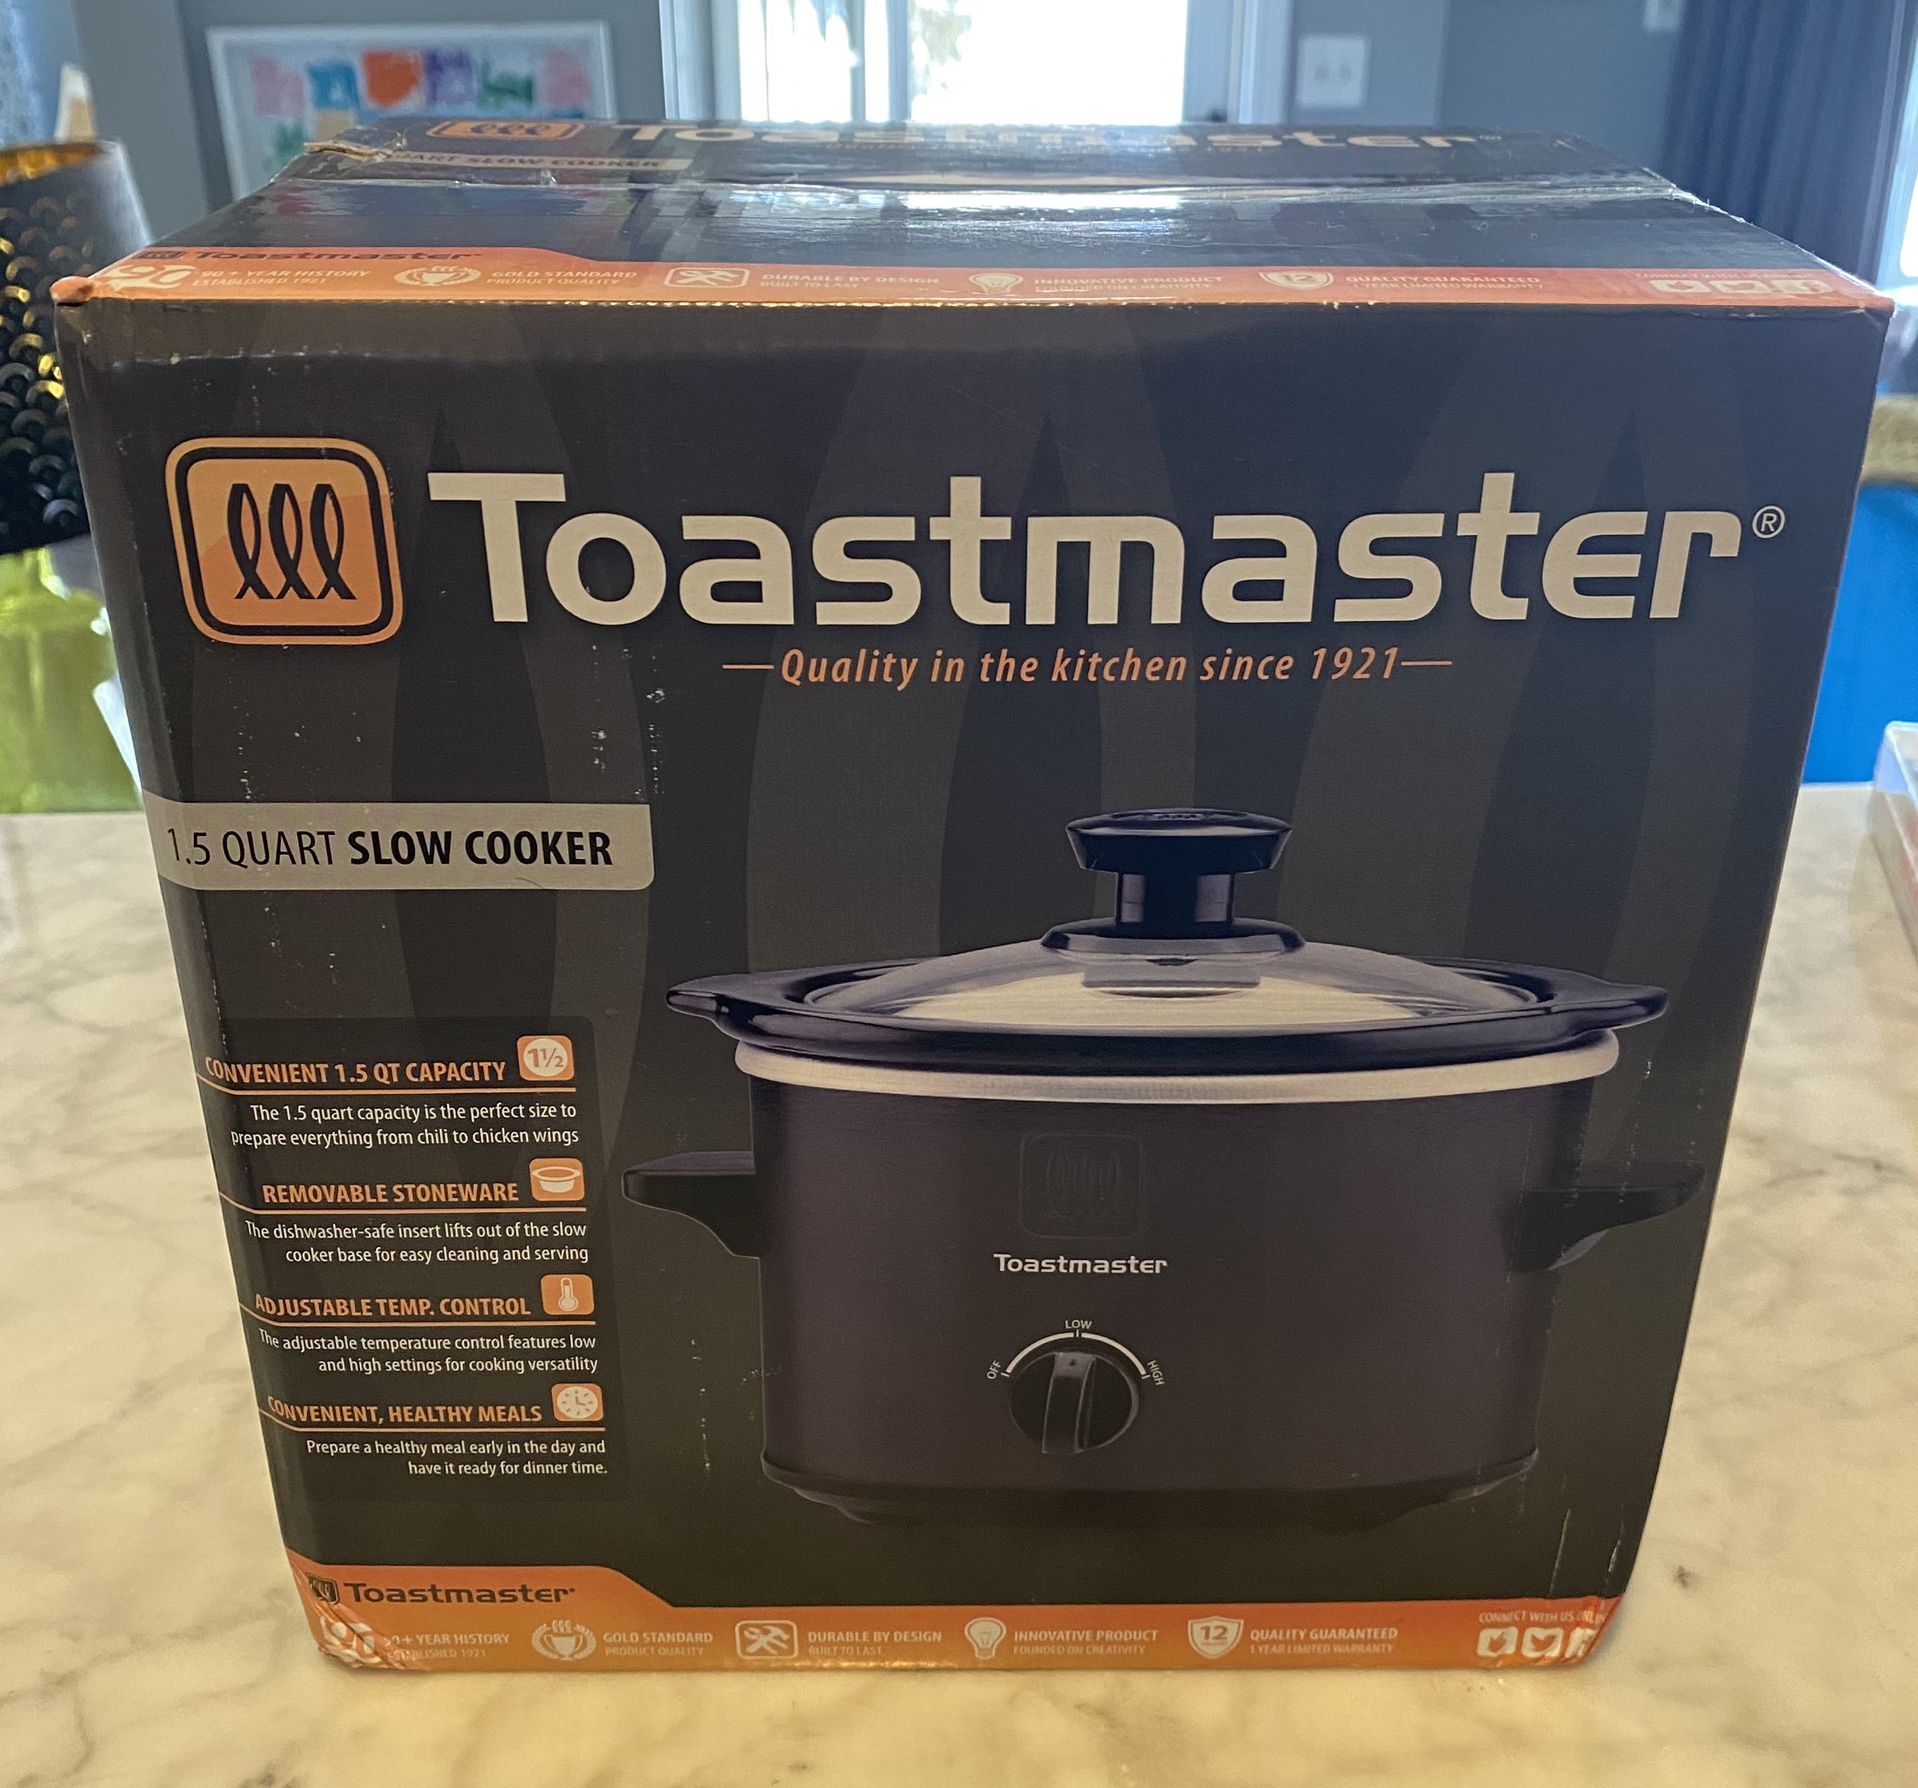 Toastmaster, 1.5 Quart, Slow Cooker. for Sale in Bellmore, NY